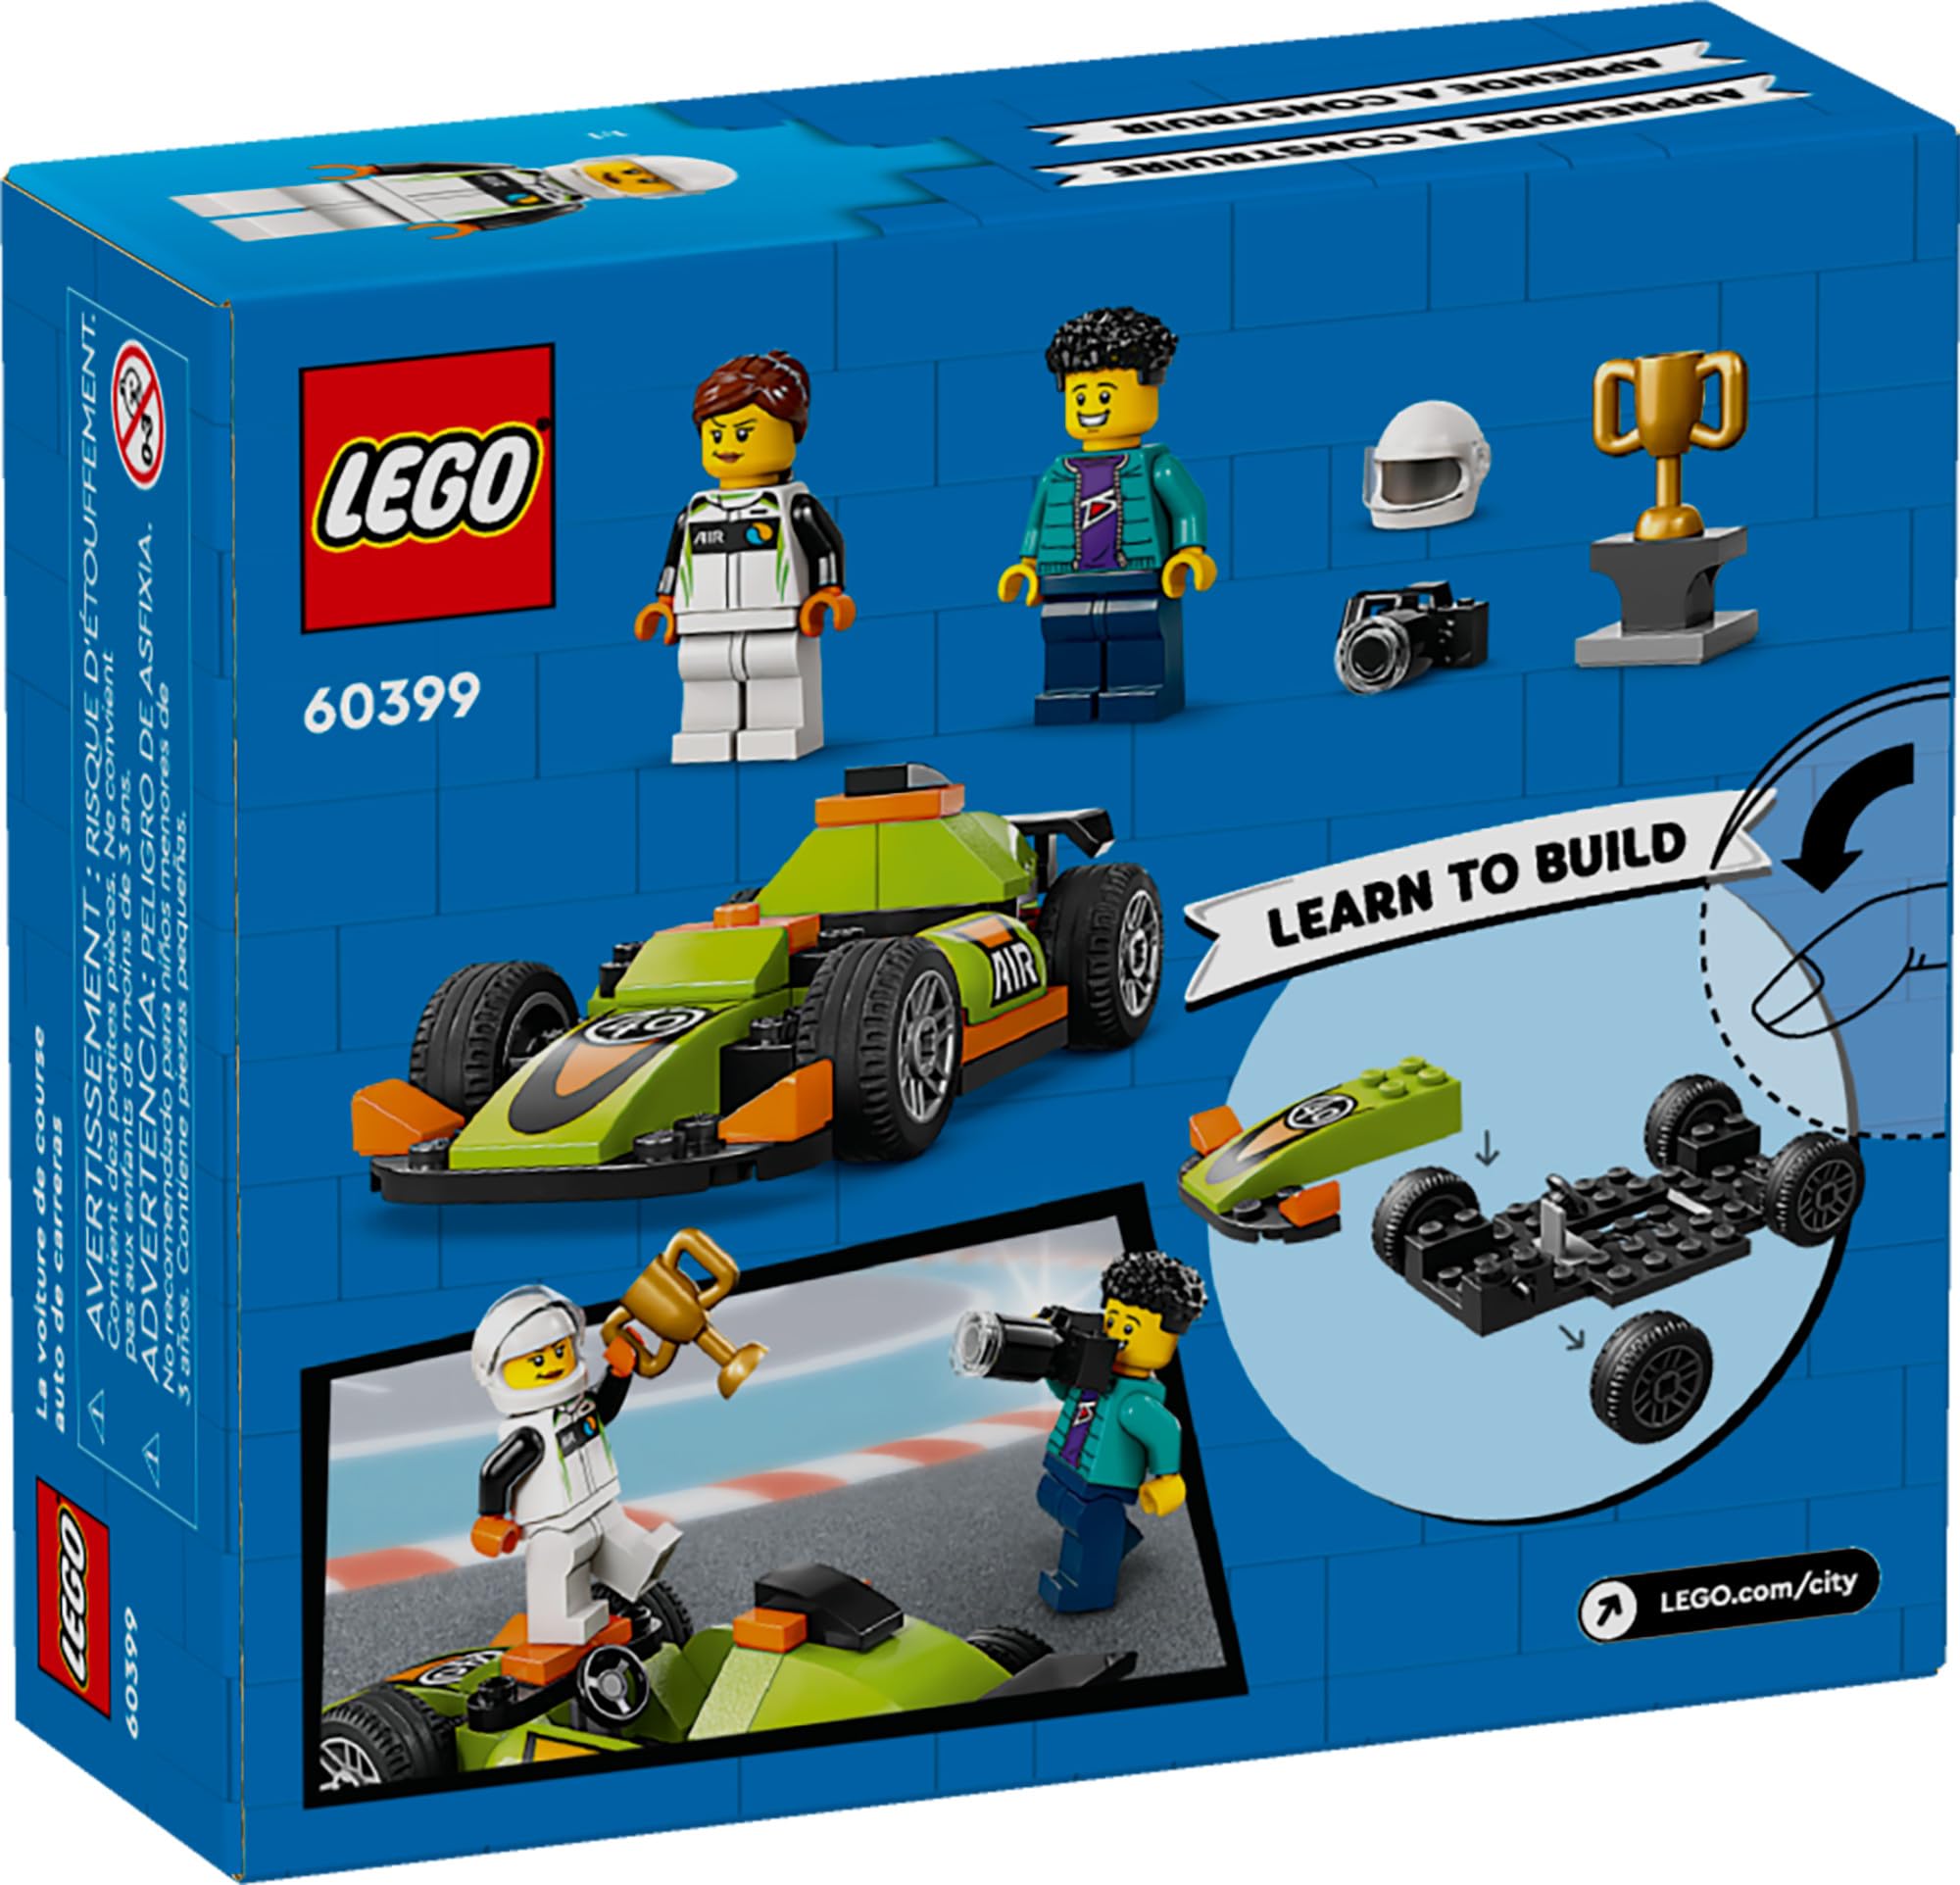 LEGO City Green Race Car Toy, Classic-Style Racing Vehicle, Small Toy Gift for Kids, Building Kit for Boys and Girls Ages 4 and Up, Photographer and Driver Minifigures, 60399